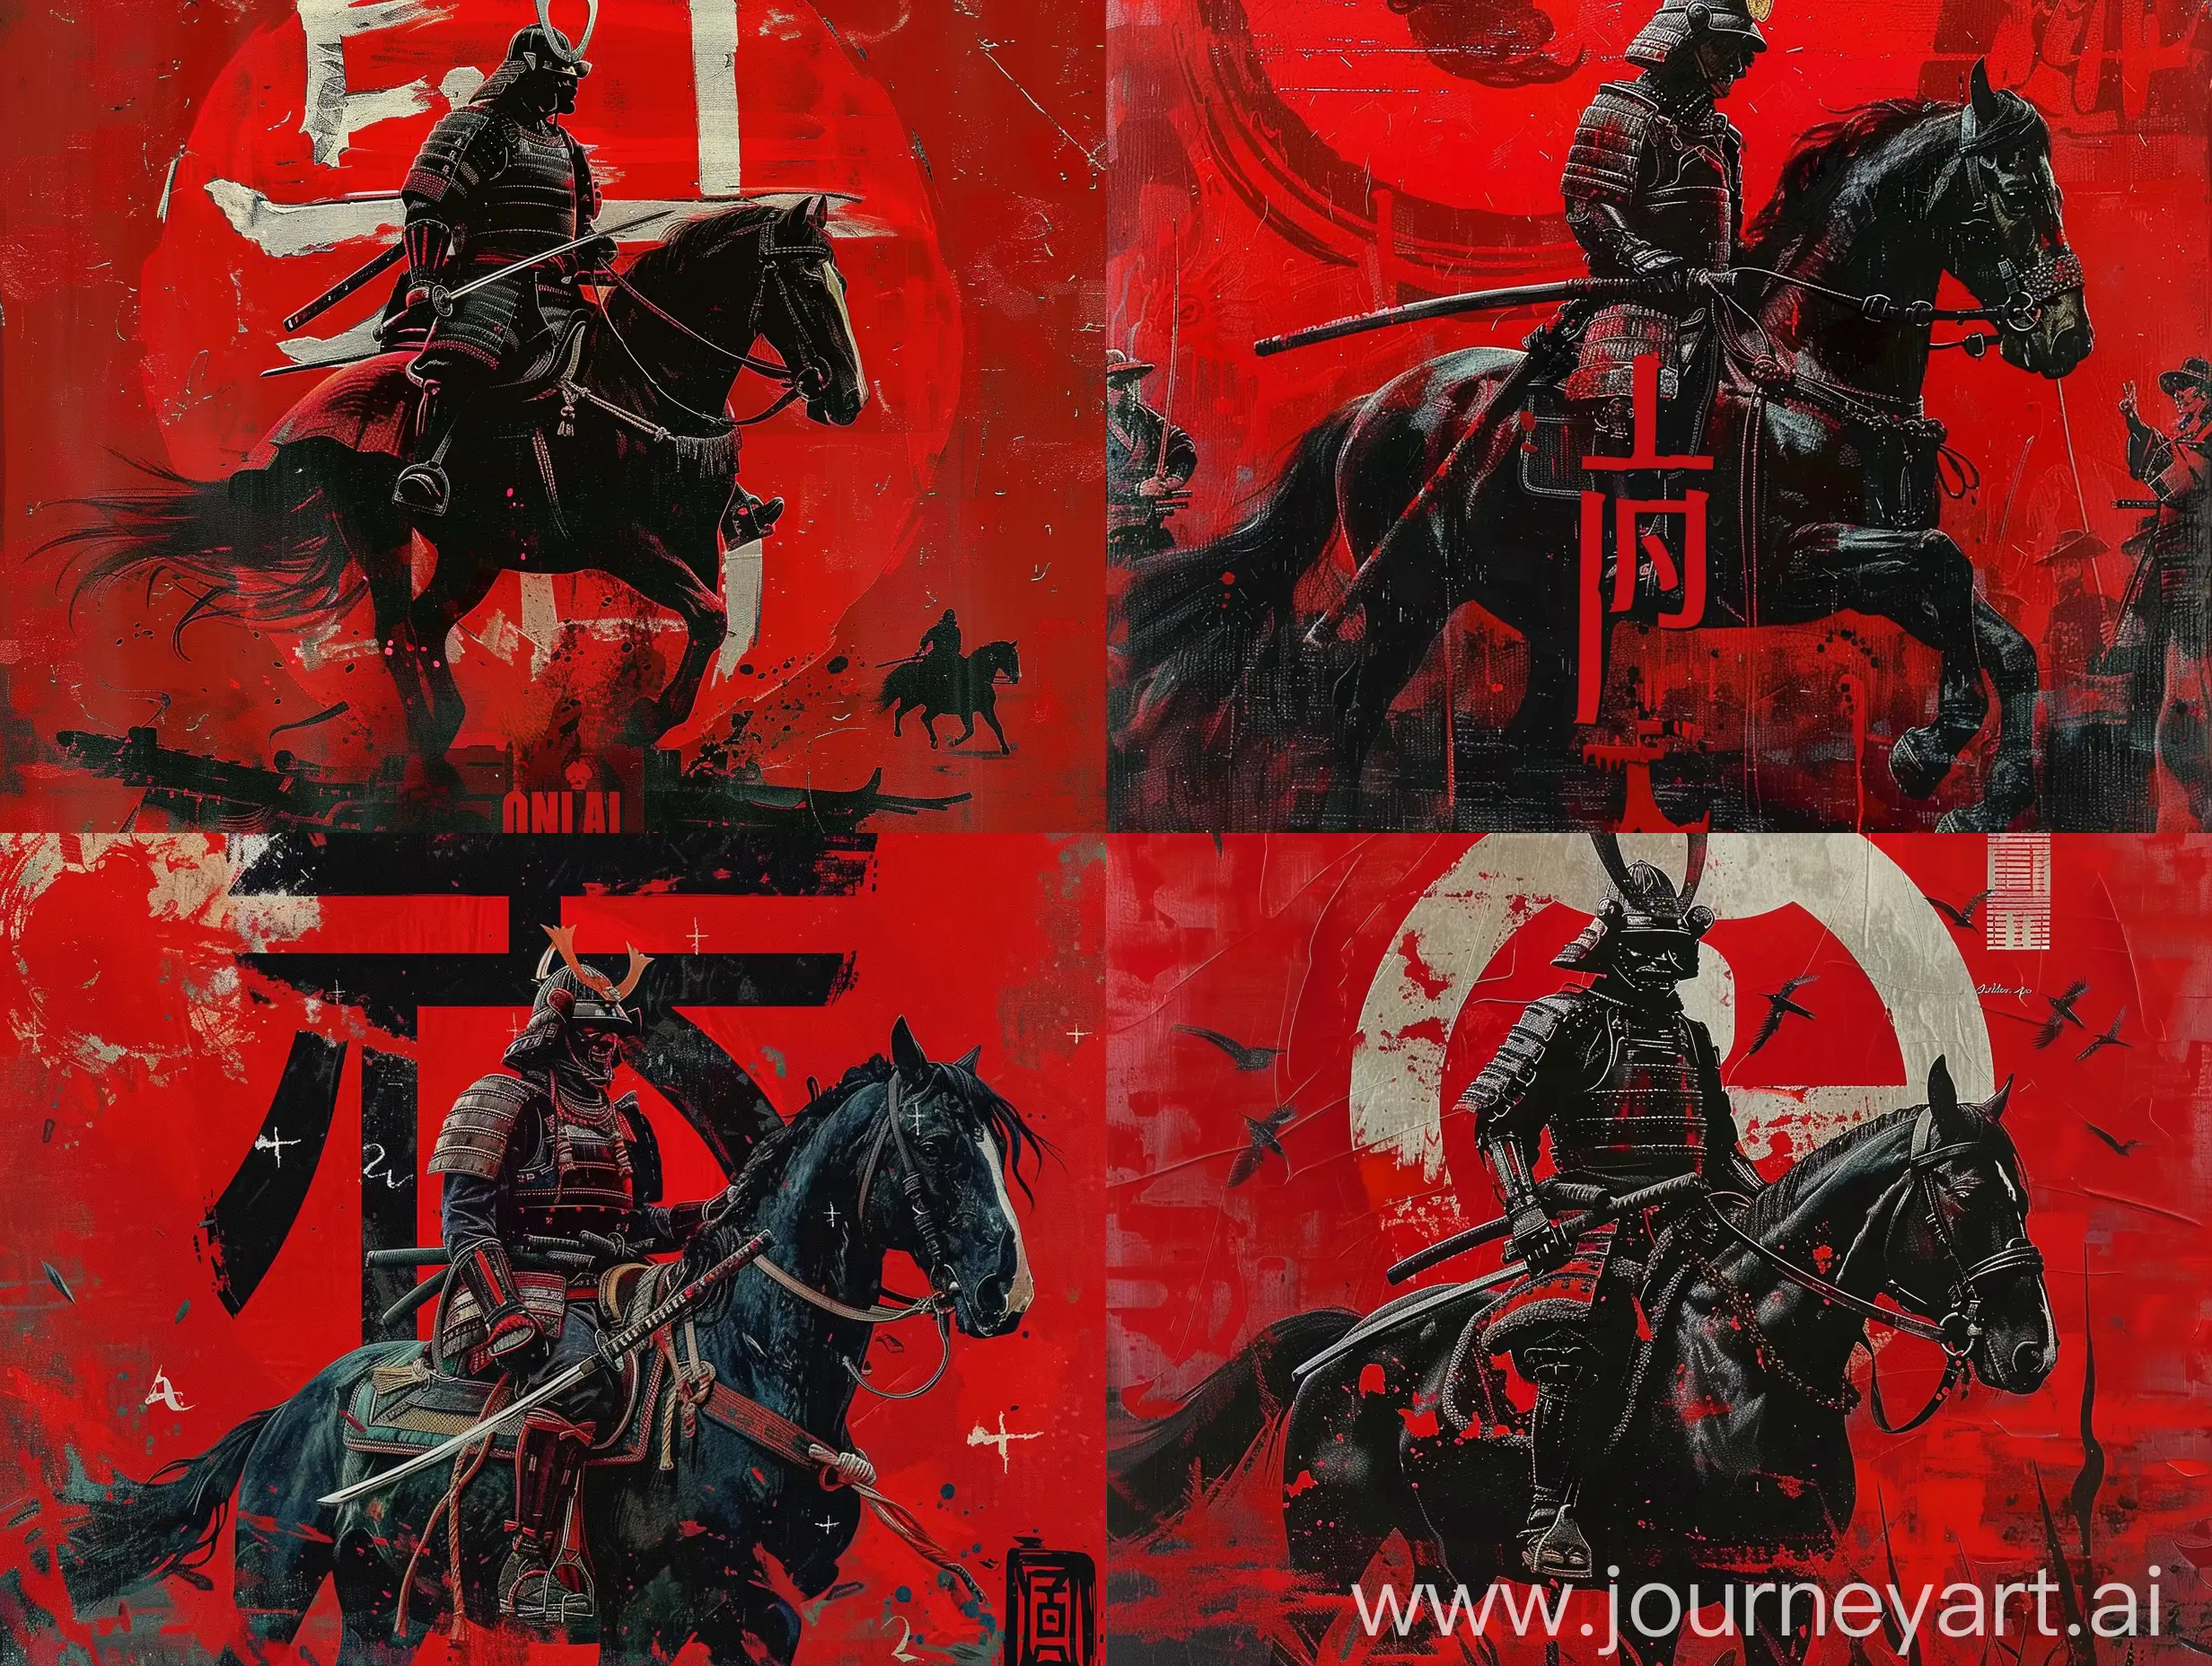 https://i.hizliresim.com/8hyi86h.jpg   red background samurai in front samurai mask riding on horse japanese objects in the background illustration in oil painting style